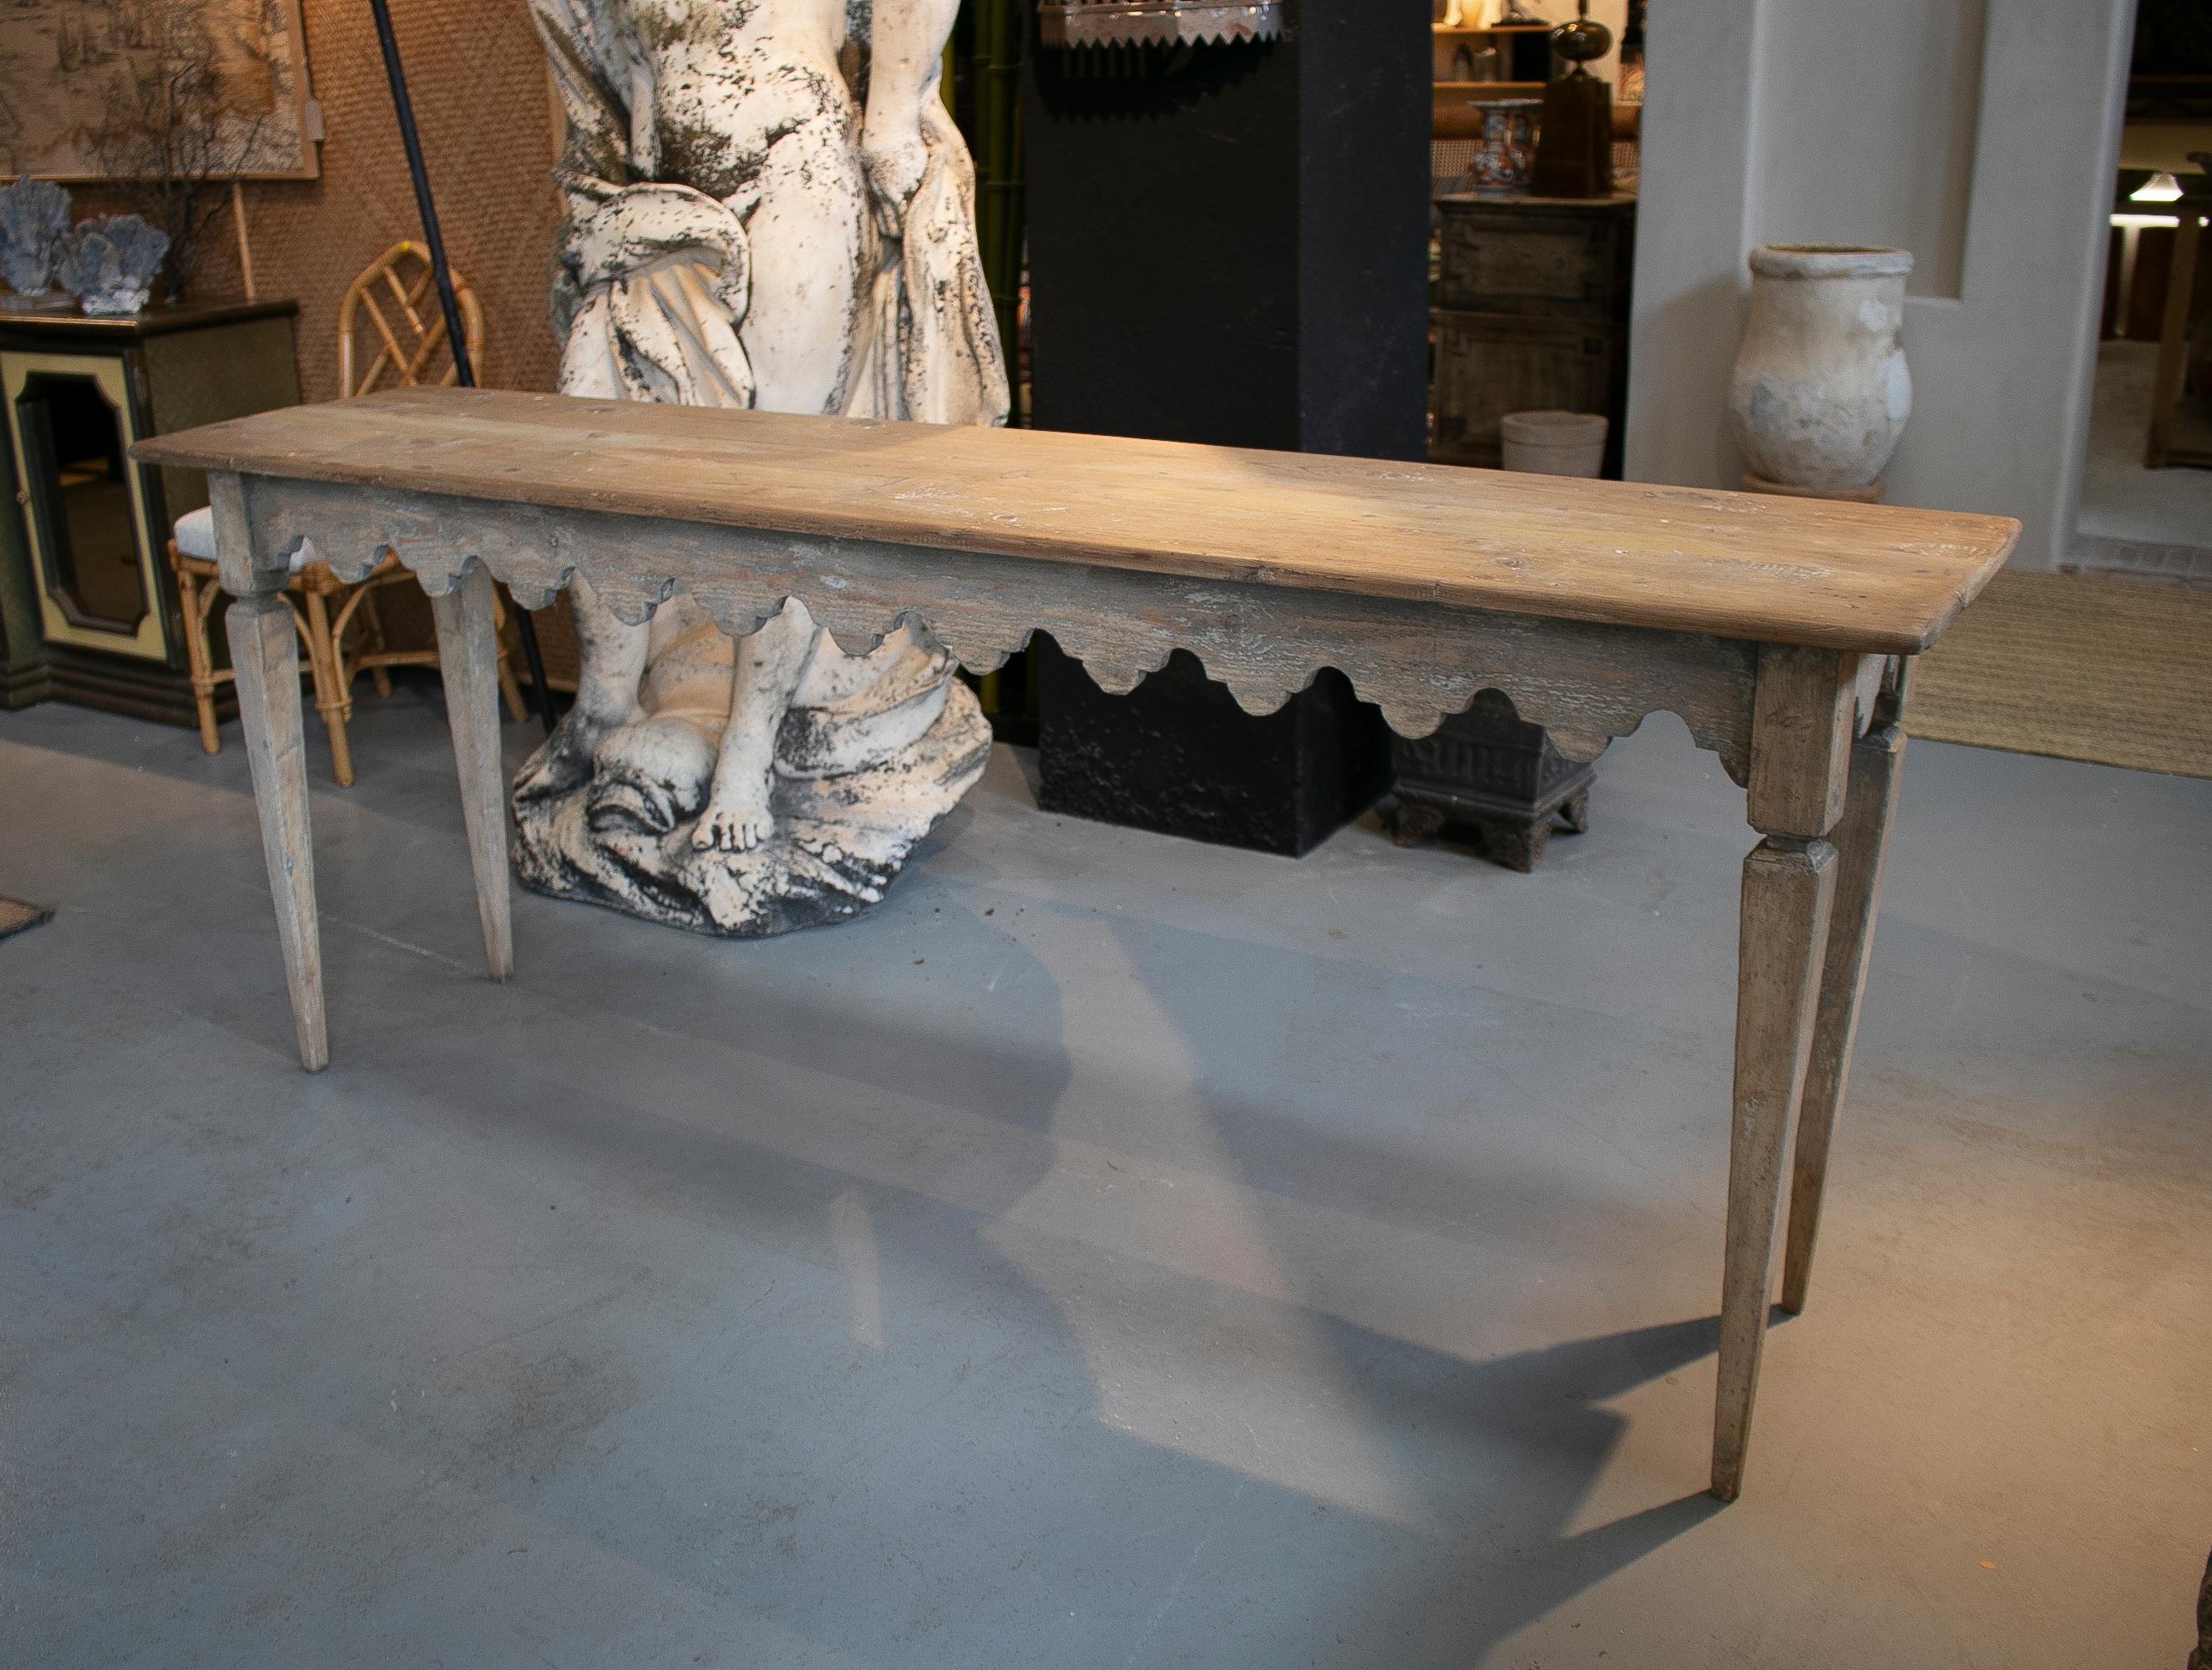 Rustic 1980s lime washed wooden console table with ornamental geometric skirt.